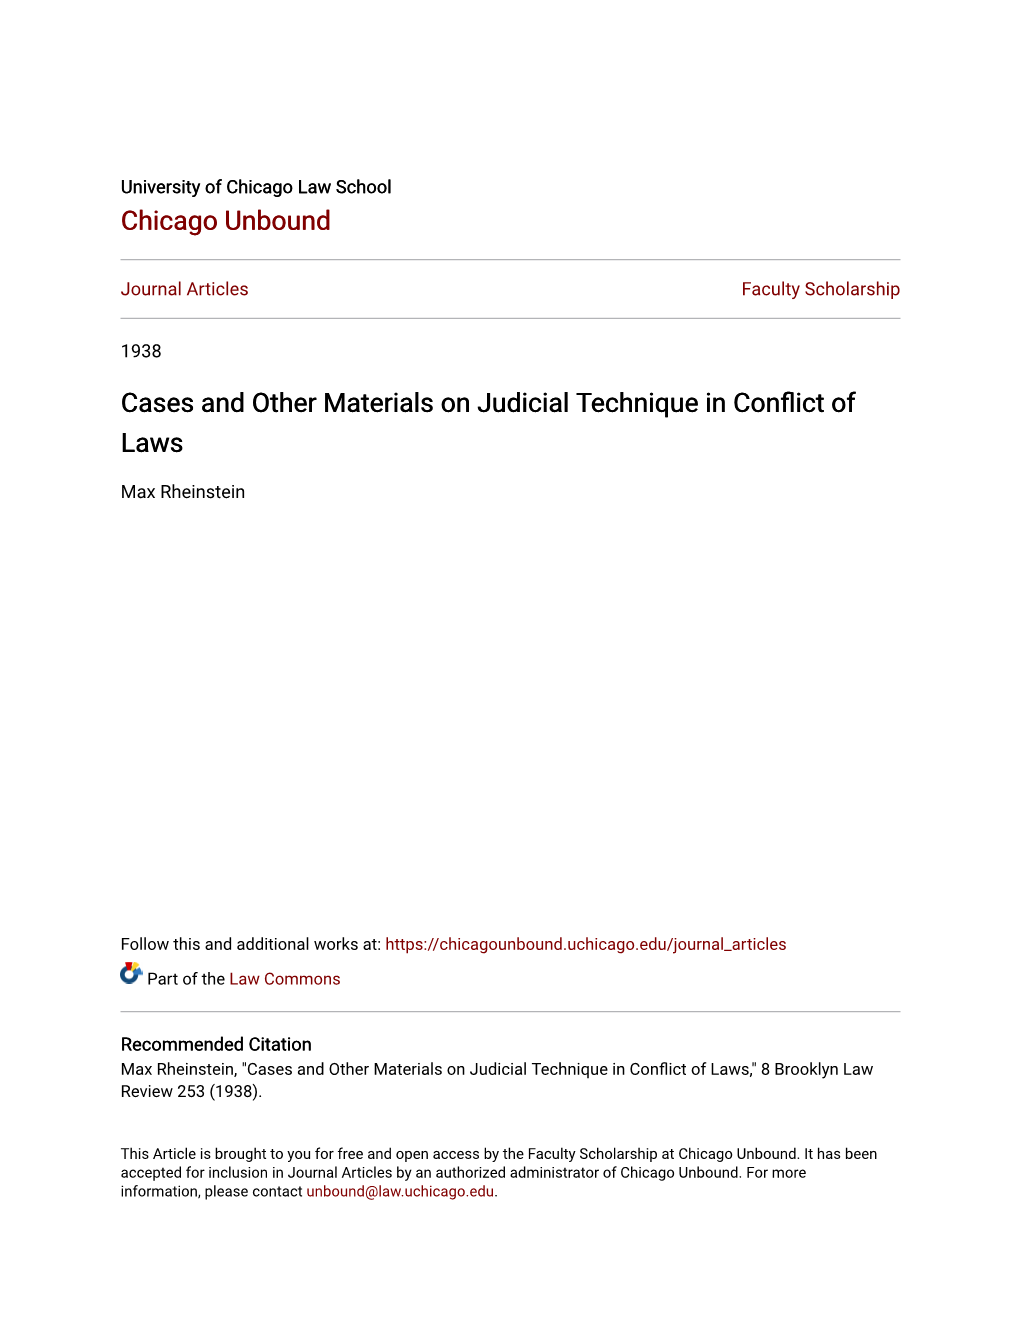 Cases and Other Materials on Judicial Technique in Conflict of Laws